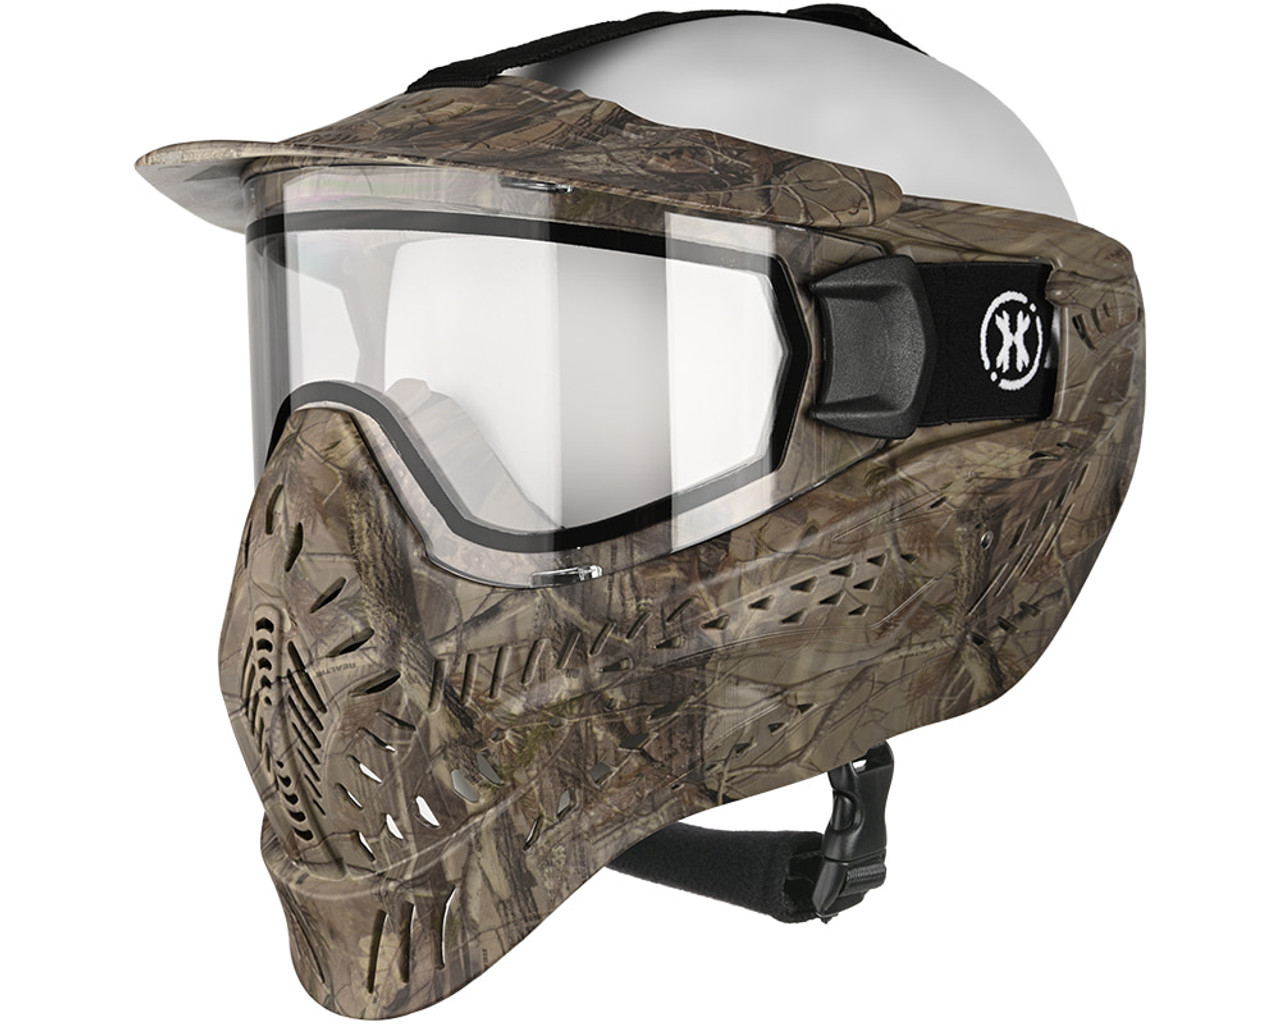 Most Breathable Paintball Mask High Price Range